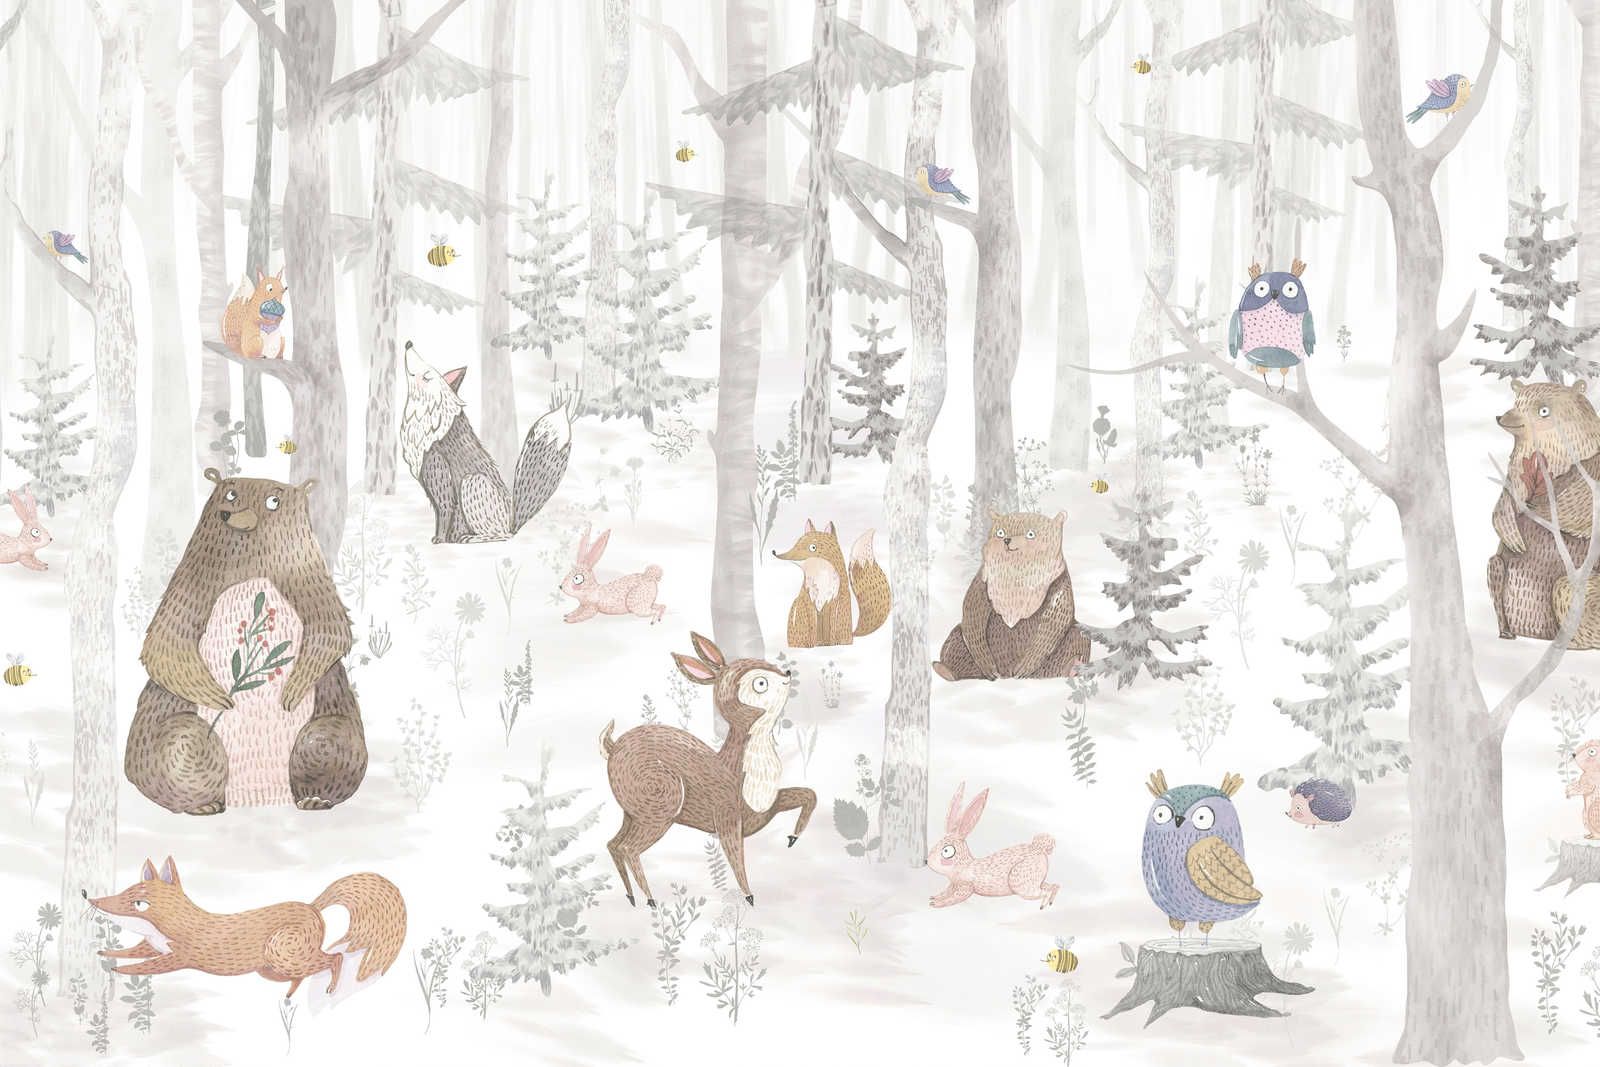             Canvas Enchanted Forest with Animals - 90 cm x 60 cm
        